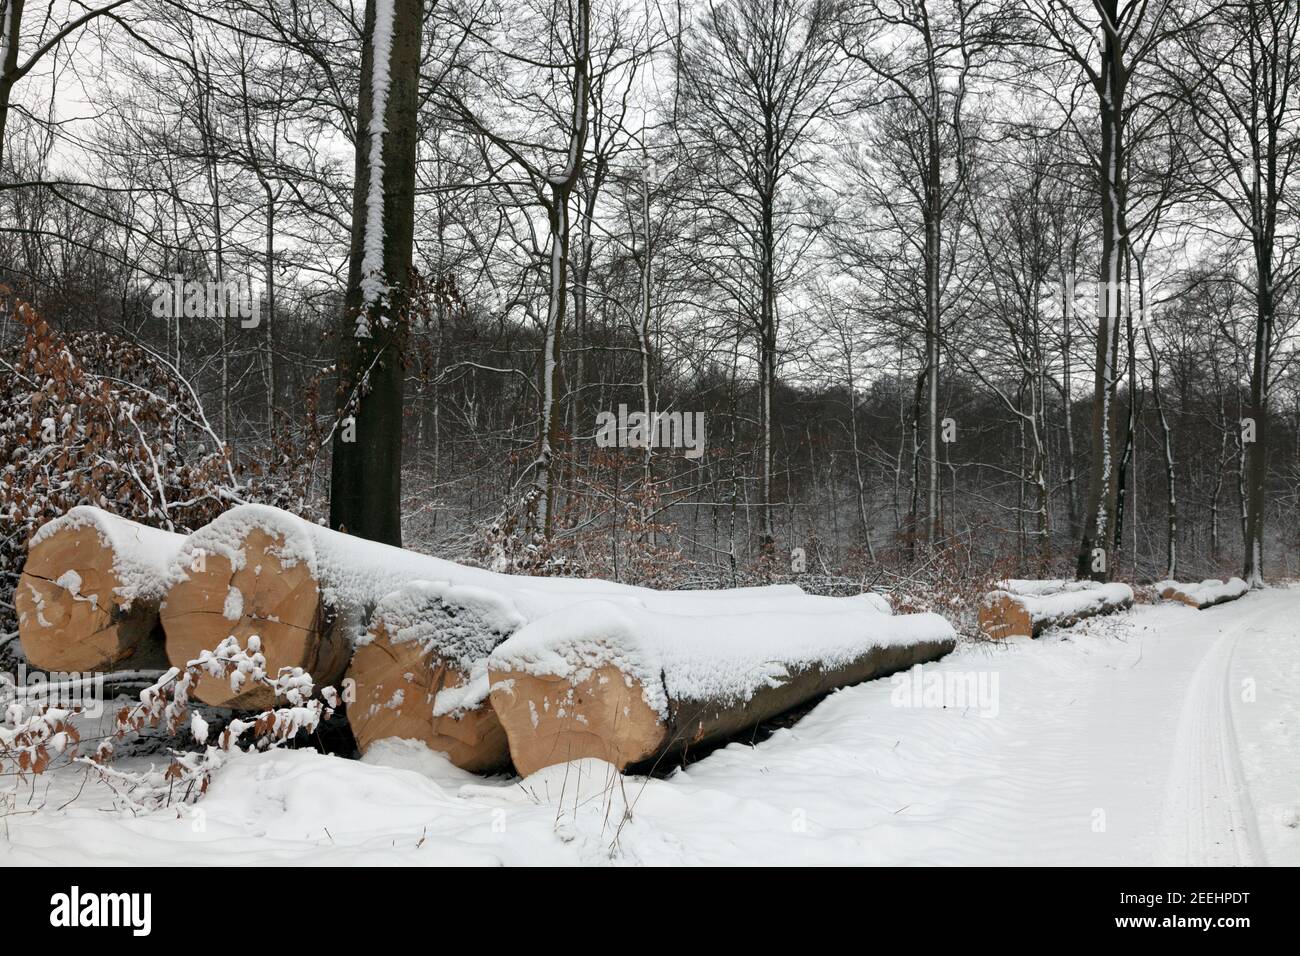 Winter in the Folehave forest in North Sealand, Denmark. Logs covered in snow along wood path. Beech. Bare trees and dead beech leaves with snow. Stock Photo